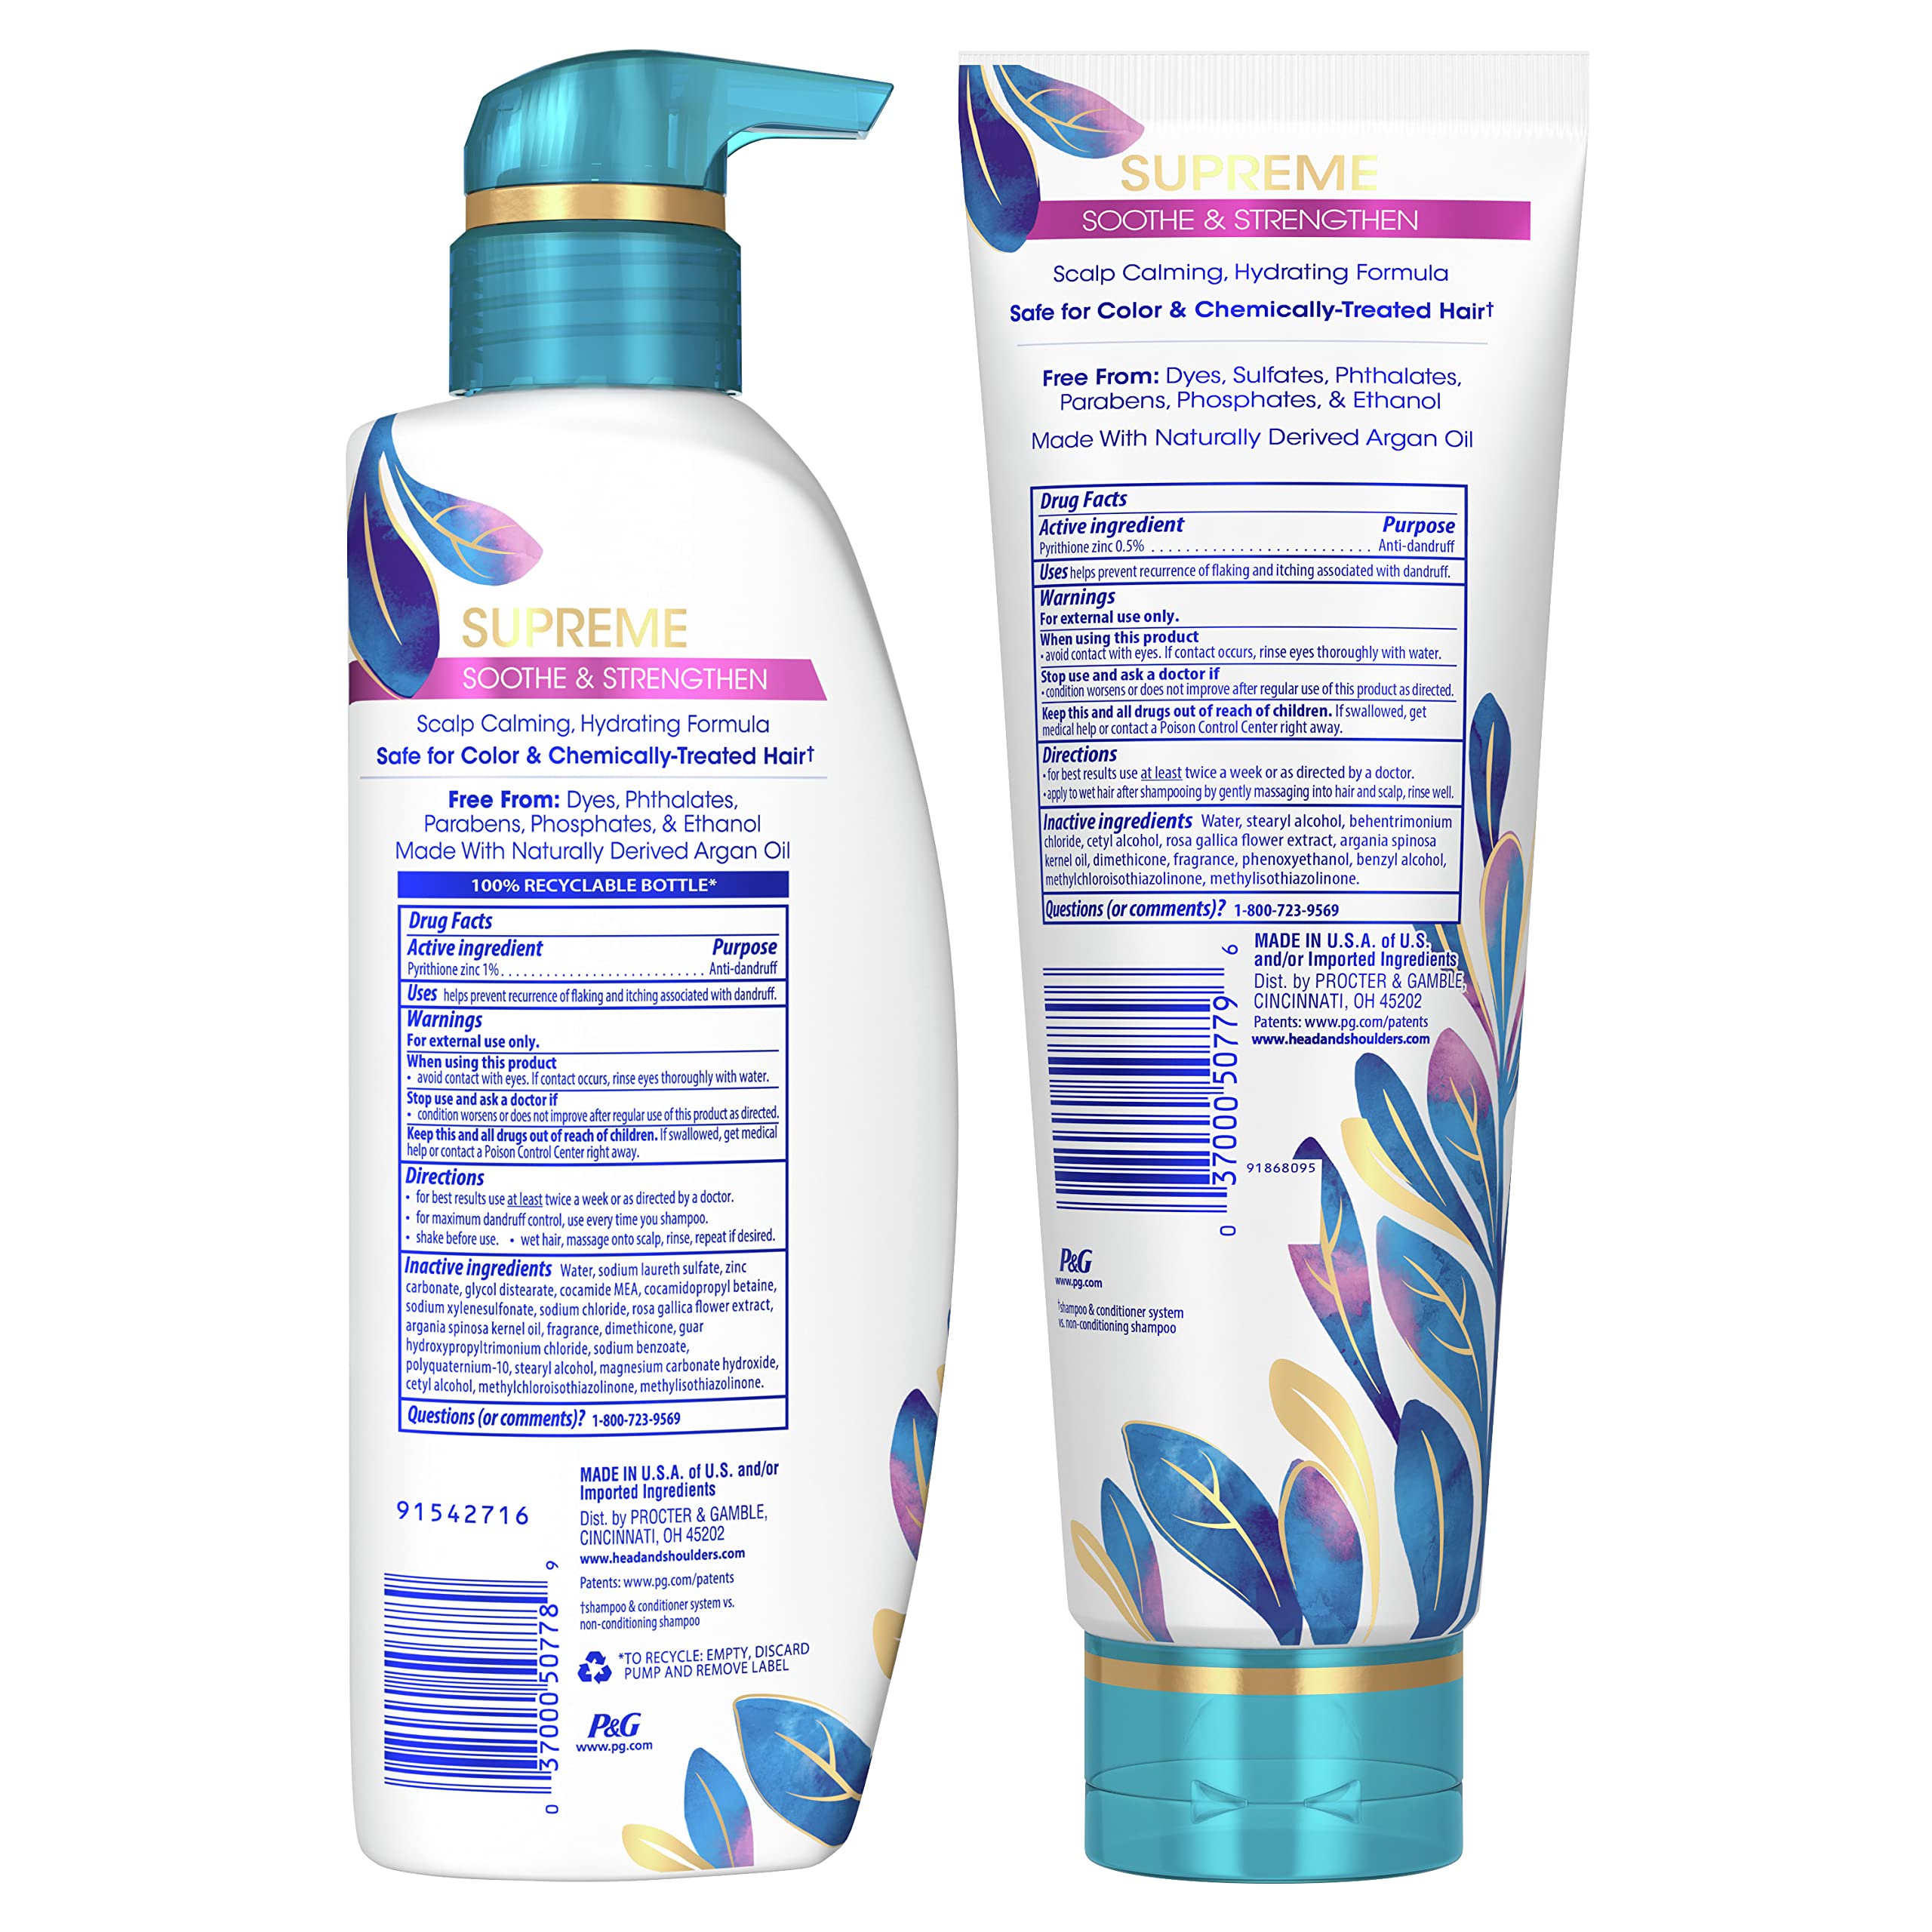 Head & Shoulders Supreme Sulfate Free Shampoo and Conditioner Set for Dry Scalp and Dandruff Treatment, Soothe and Strengthen with Argan Oil and Rose Essence, 21.2 Fl Oz